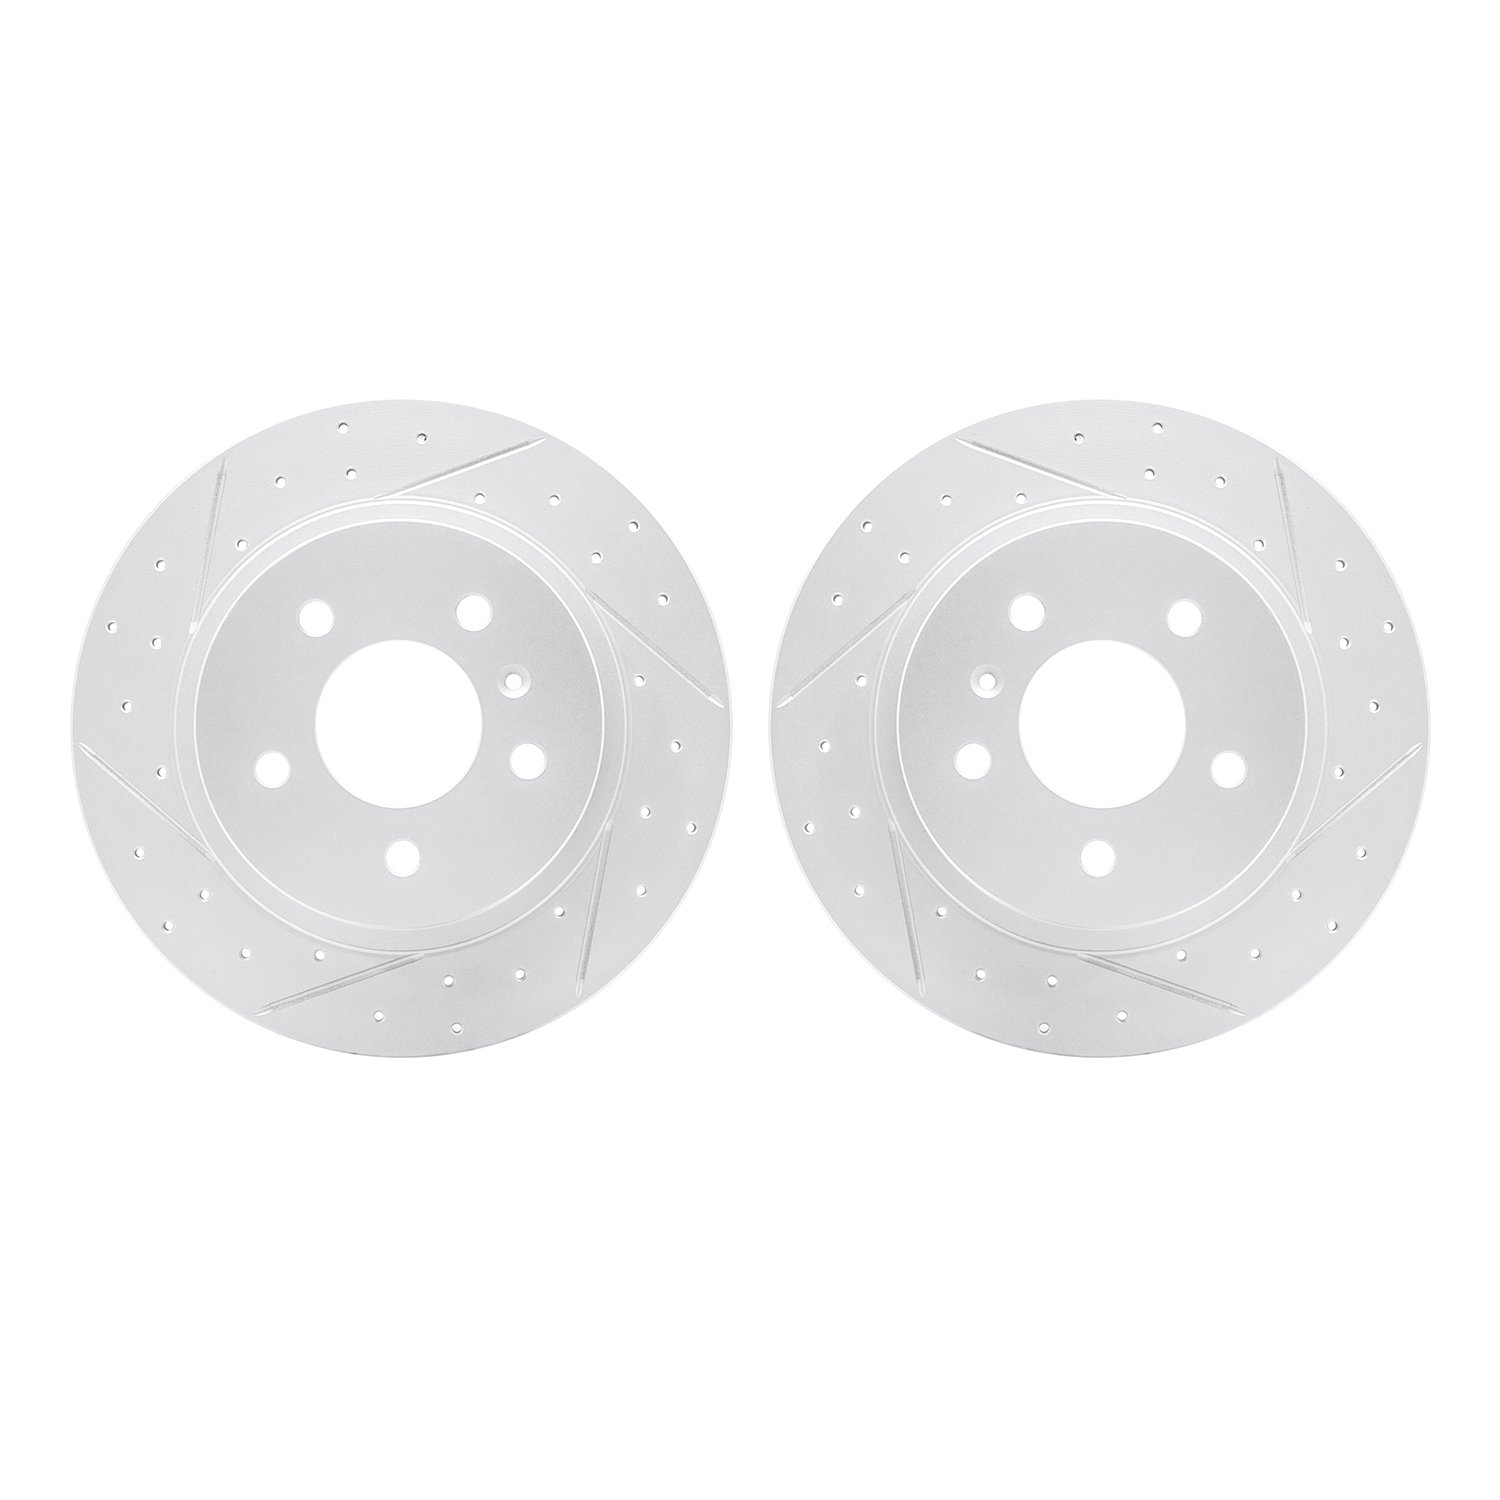 2002-45018 Geoperformance Drilled/Slotted Brake Rotors, 2006-2011 GM, Position: Rear